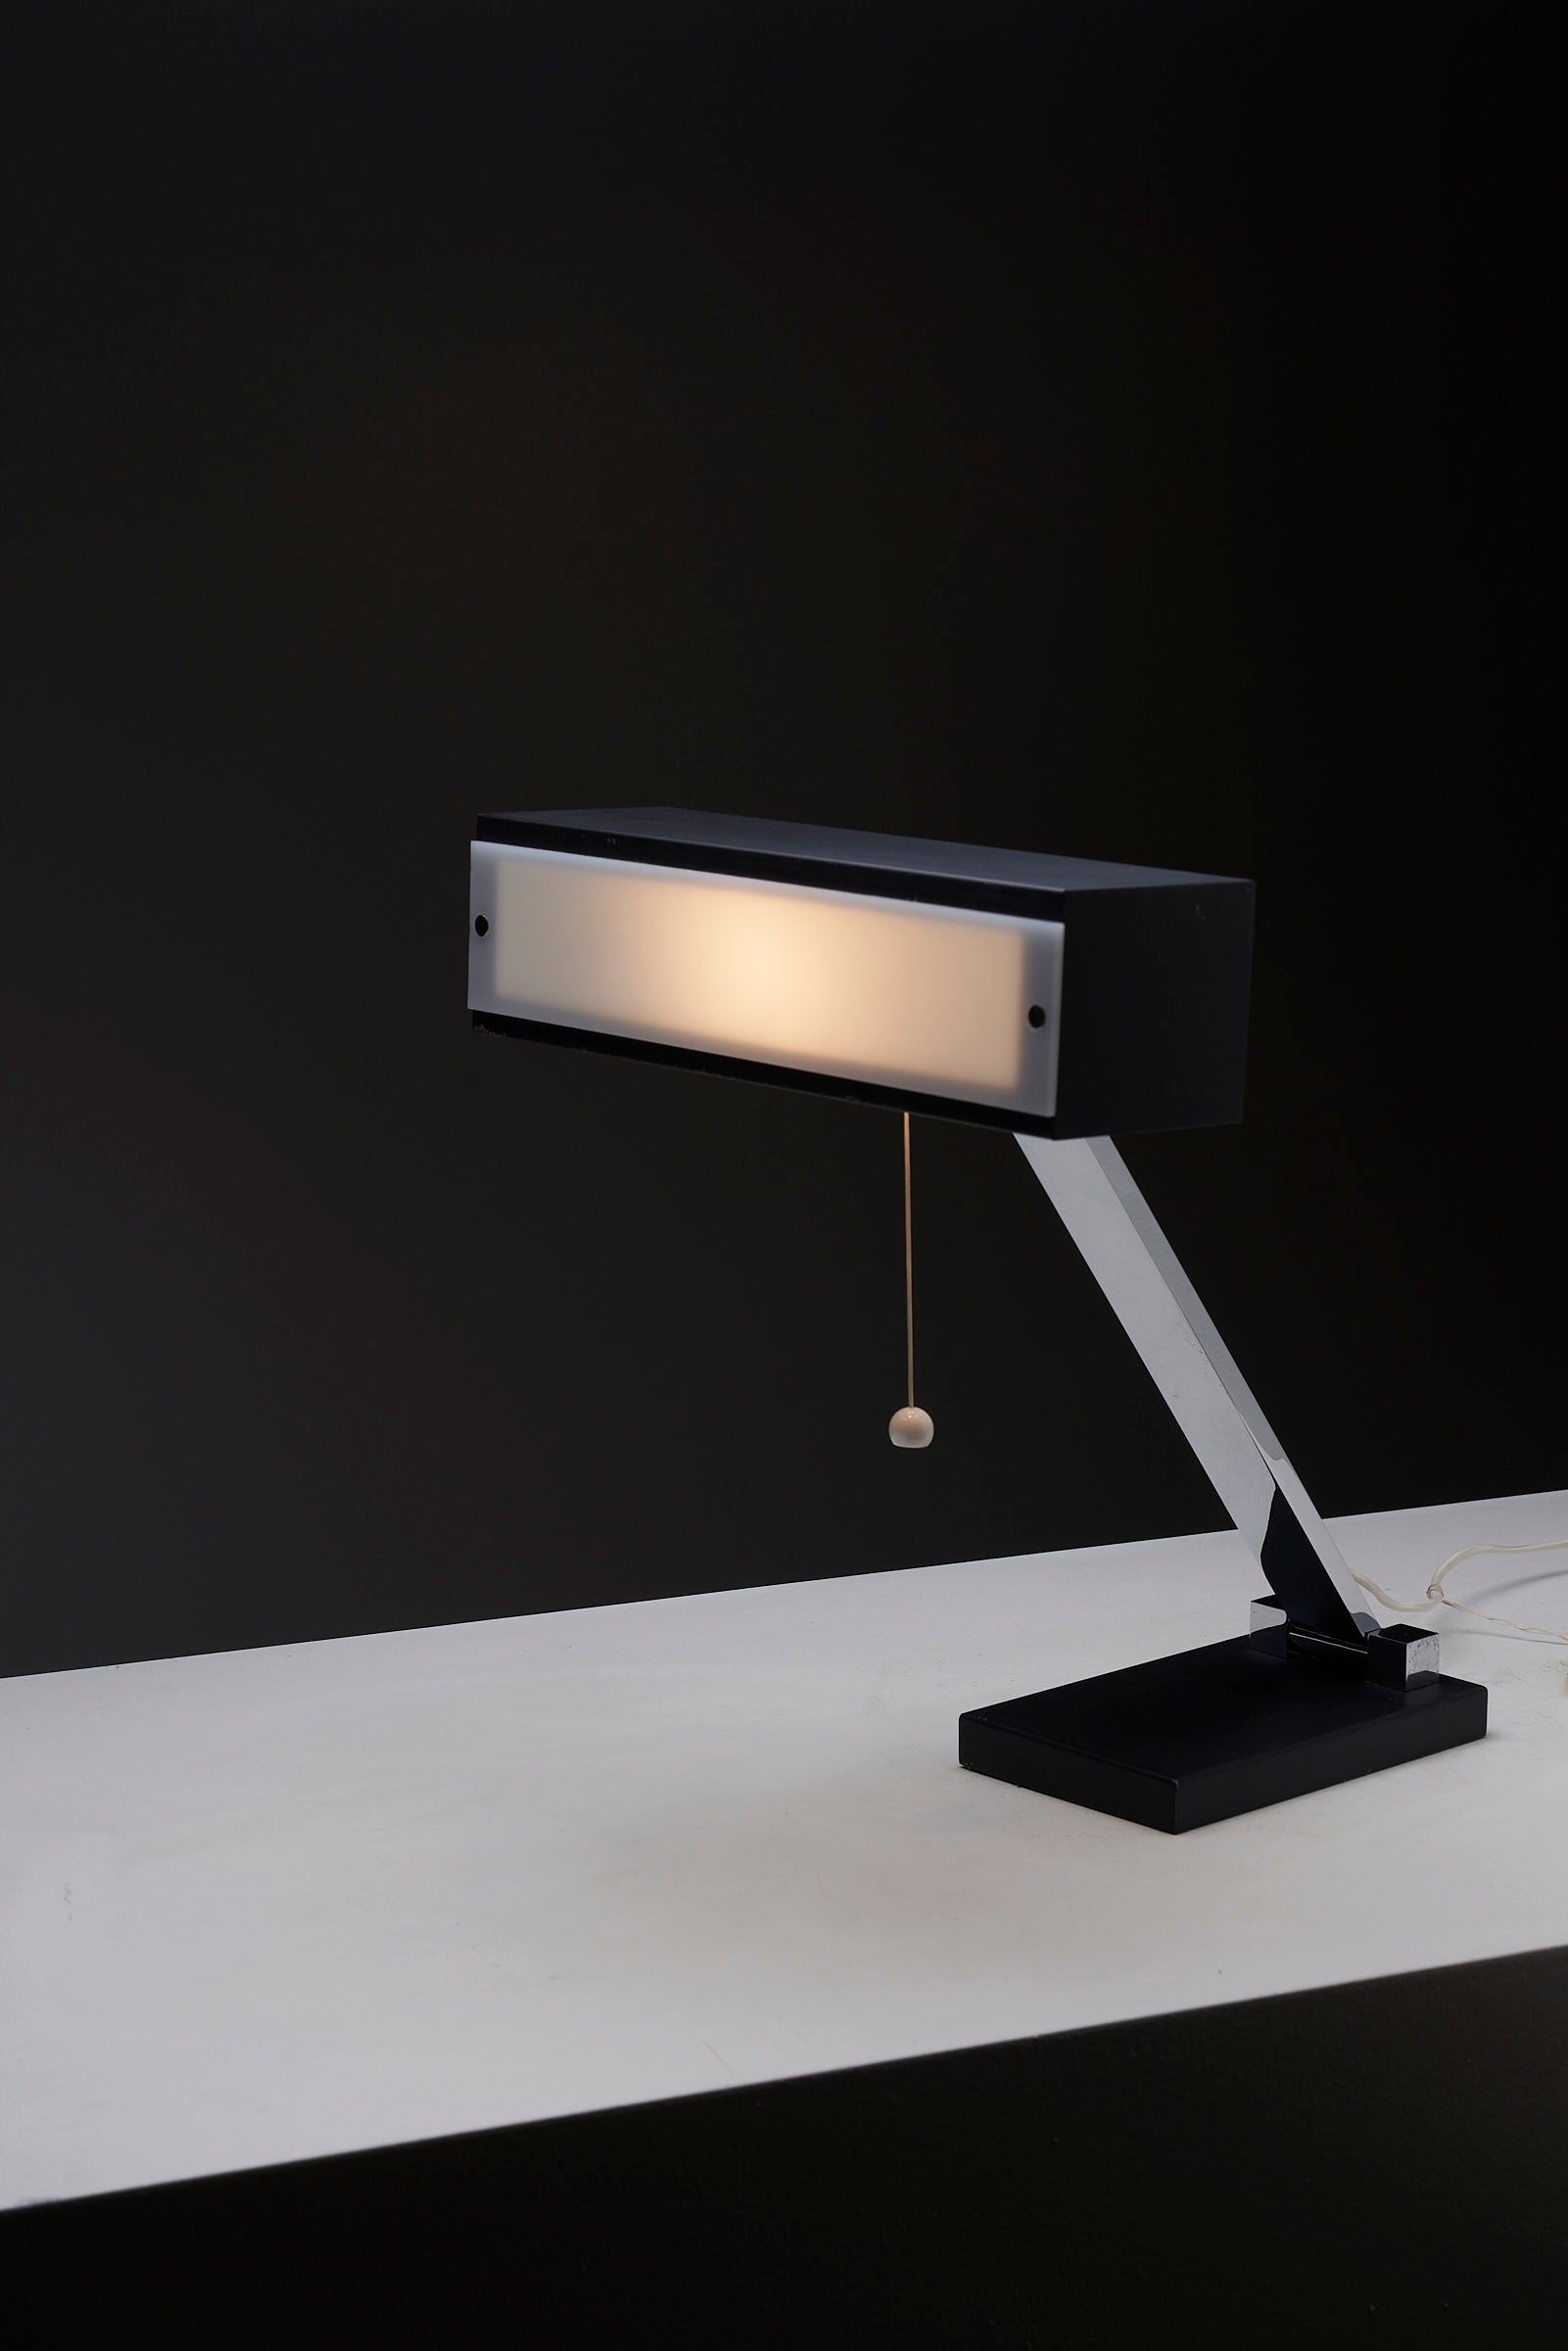 Well-built Table Lamp